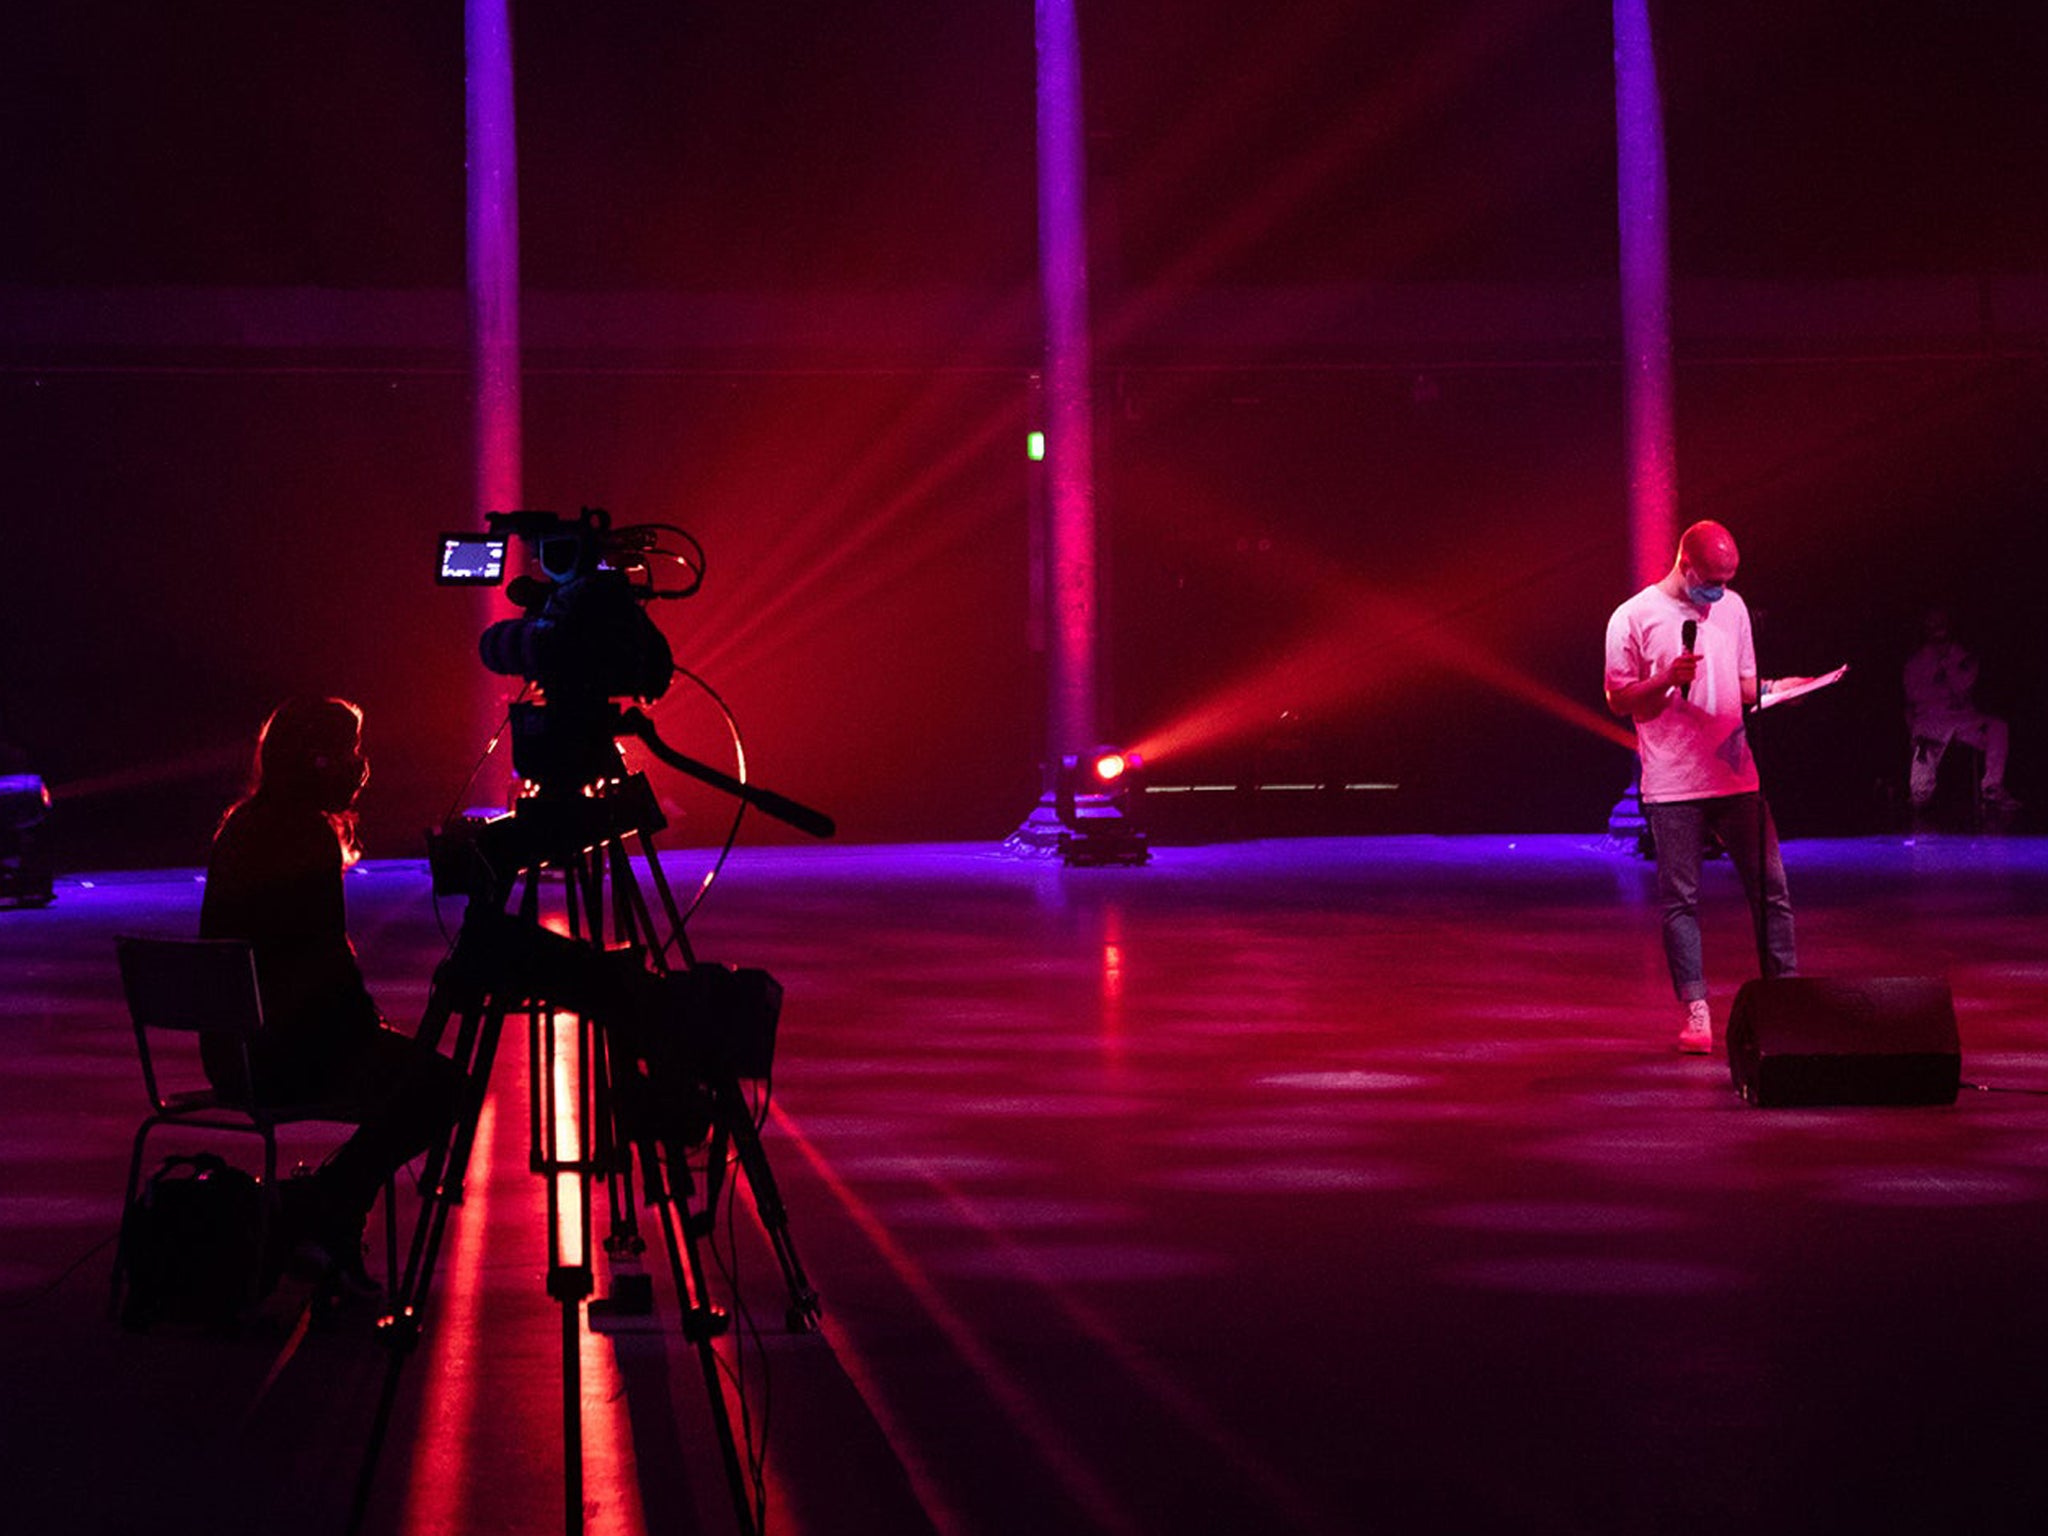 The Poetry Slam Final 2020 was live-streamed from the Roundhouse in November